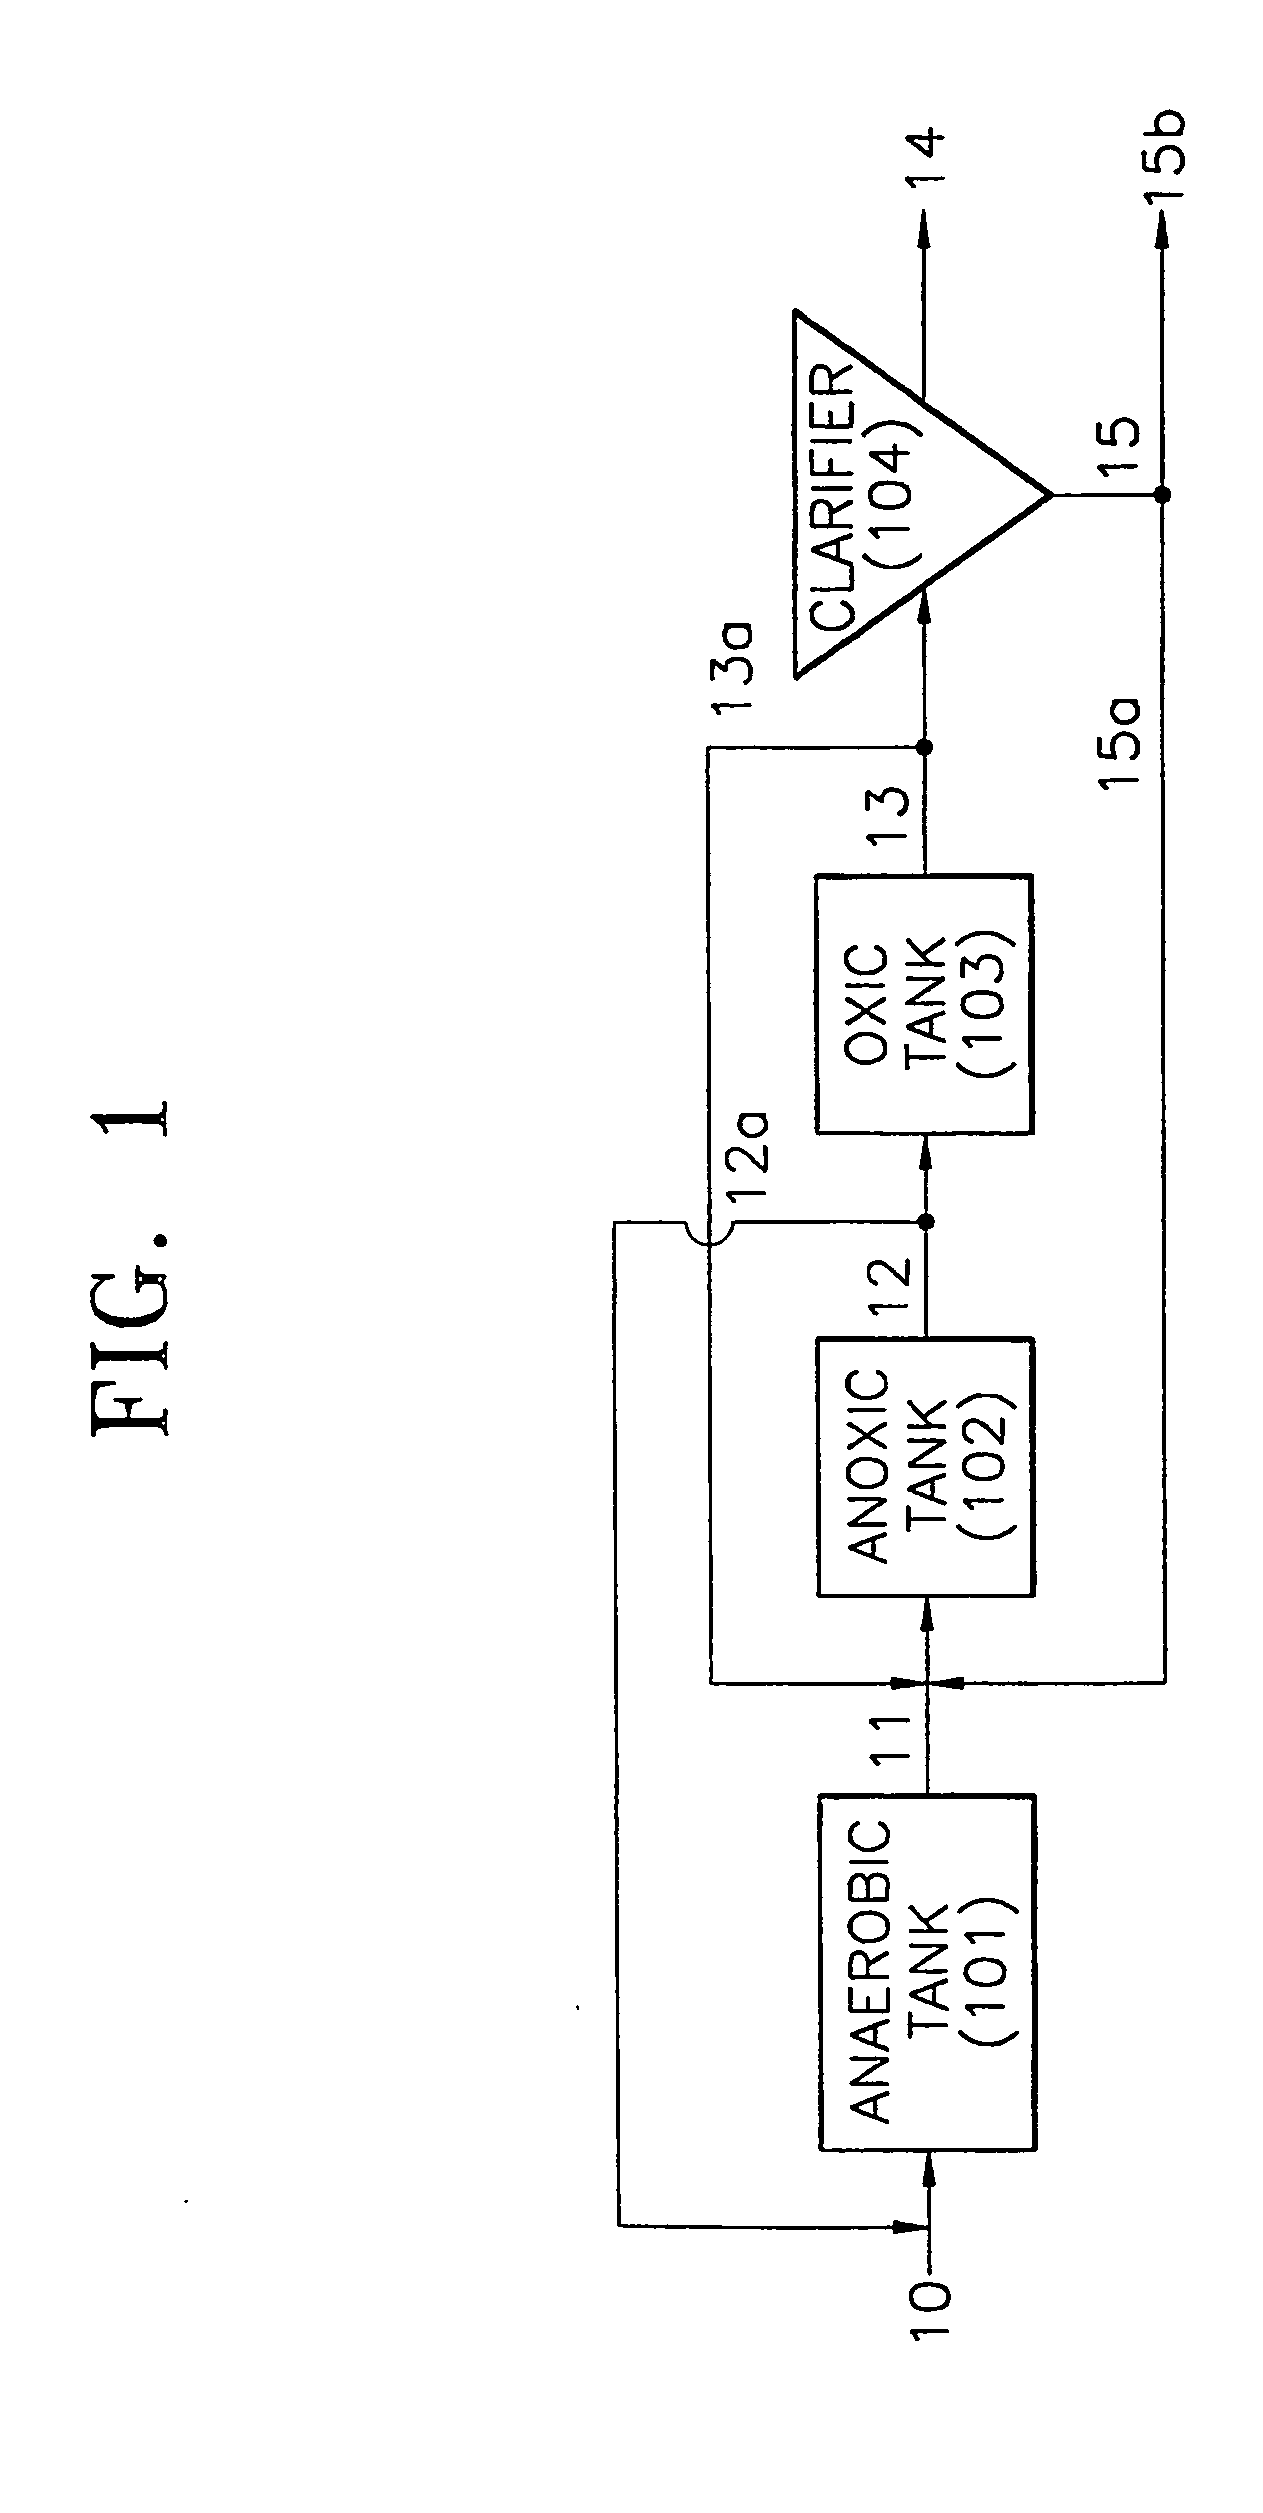 Wastewater treatment apparatus and method for removing nitrogen and phosphorus